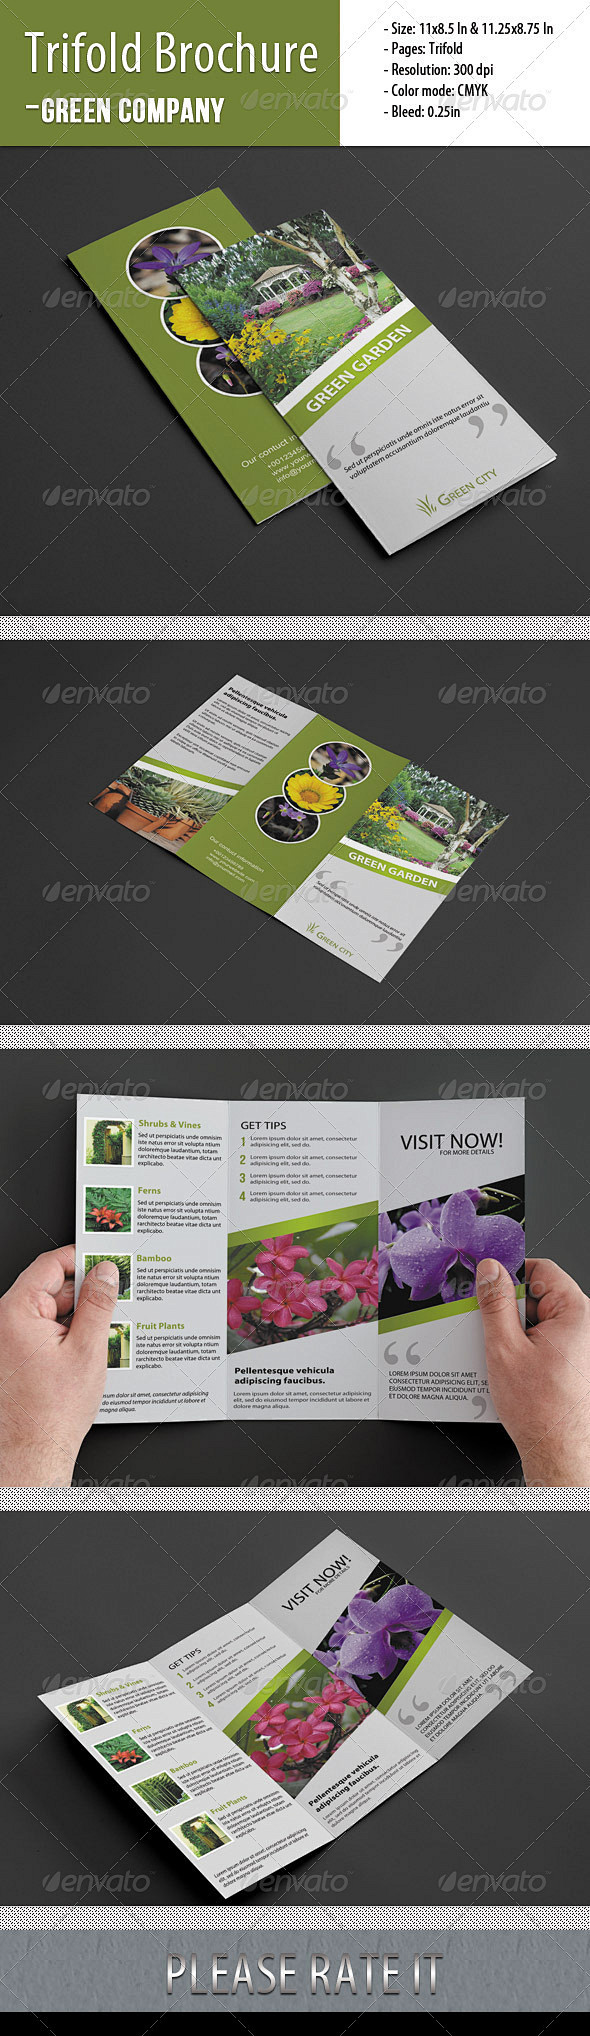 Trifold Brochure For...